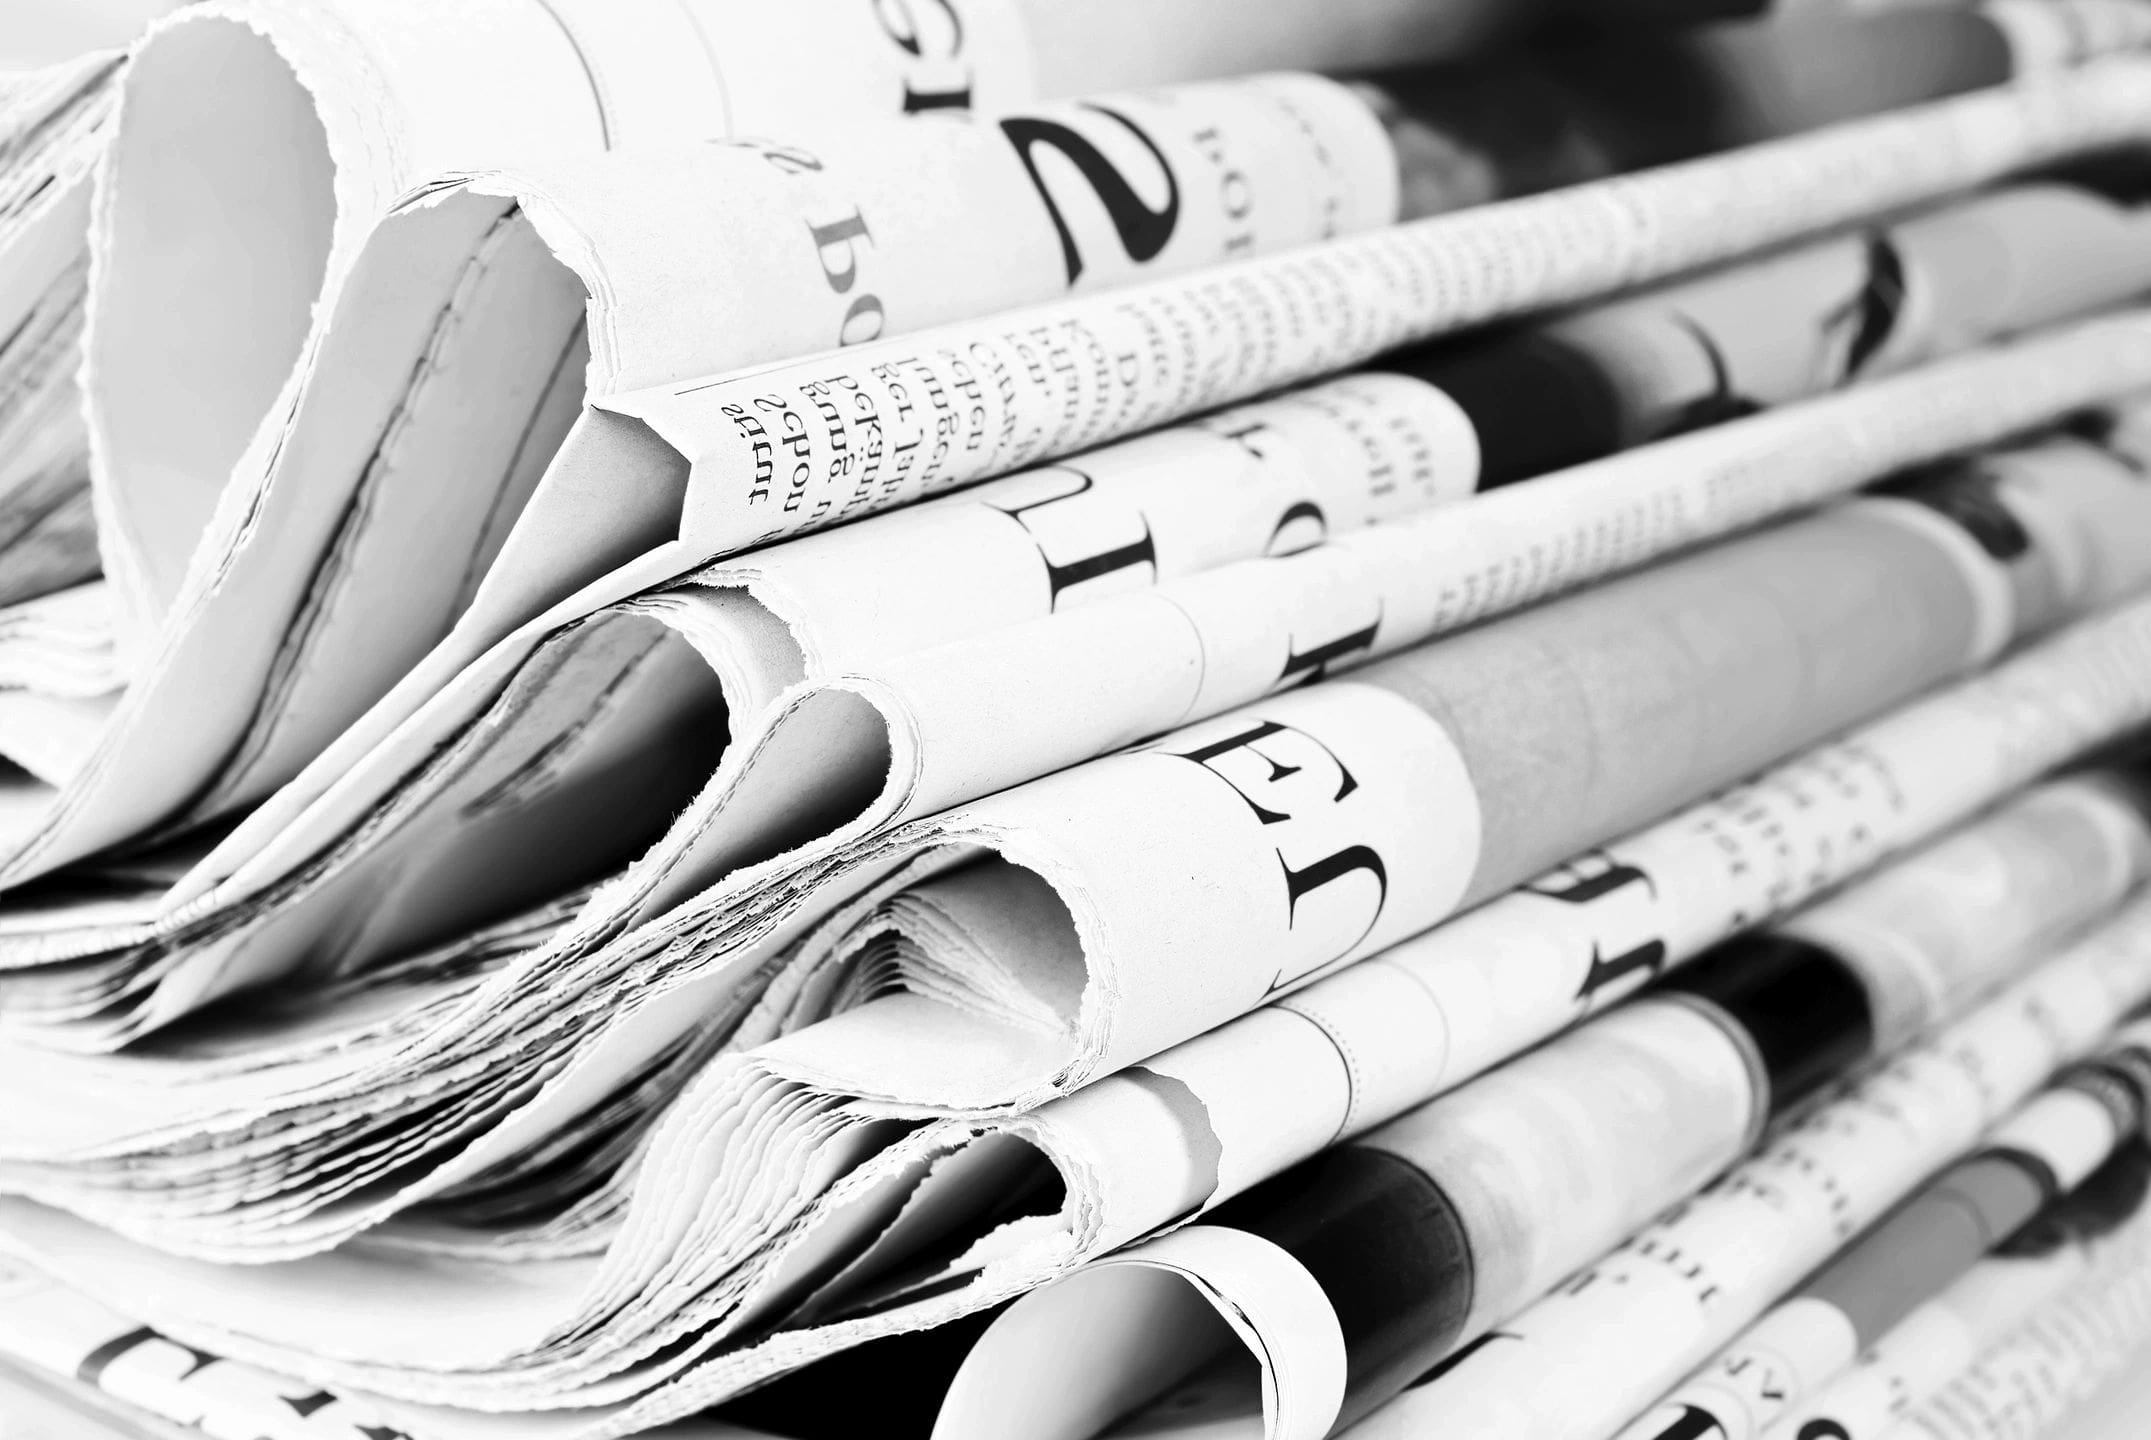 A stack of newspapers in black and white.